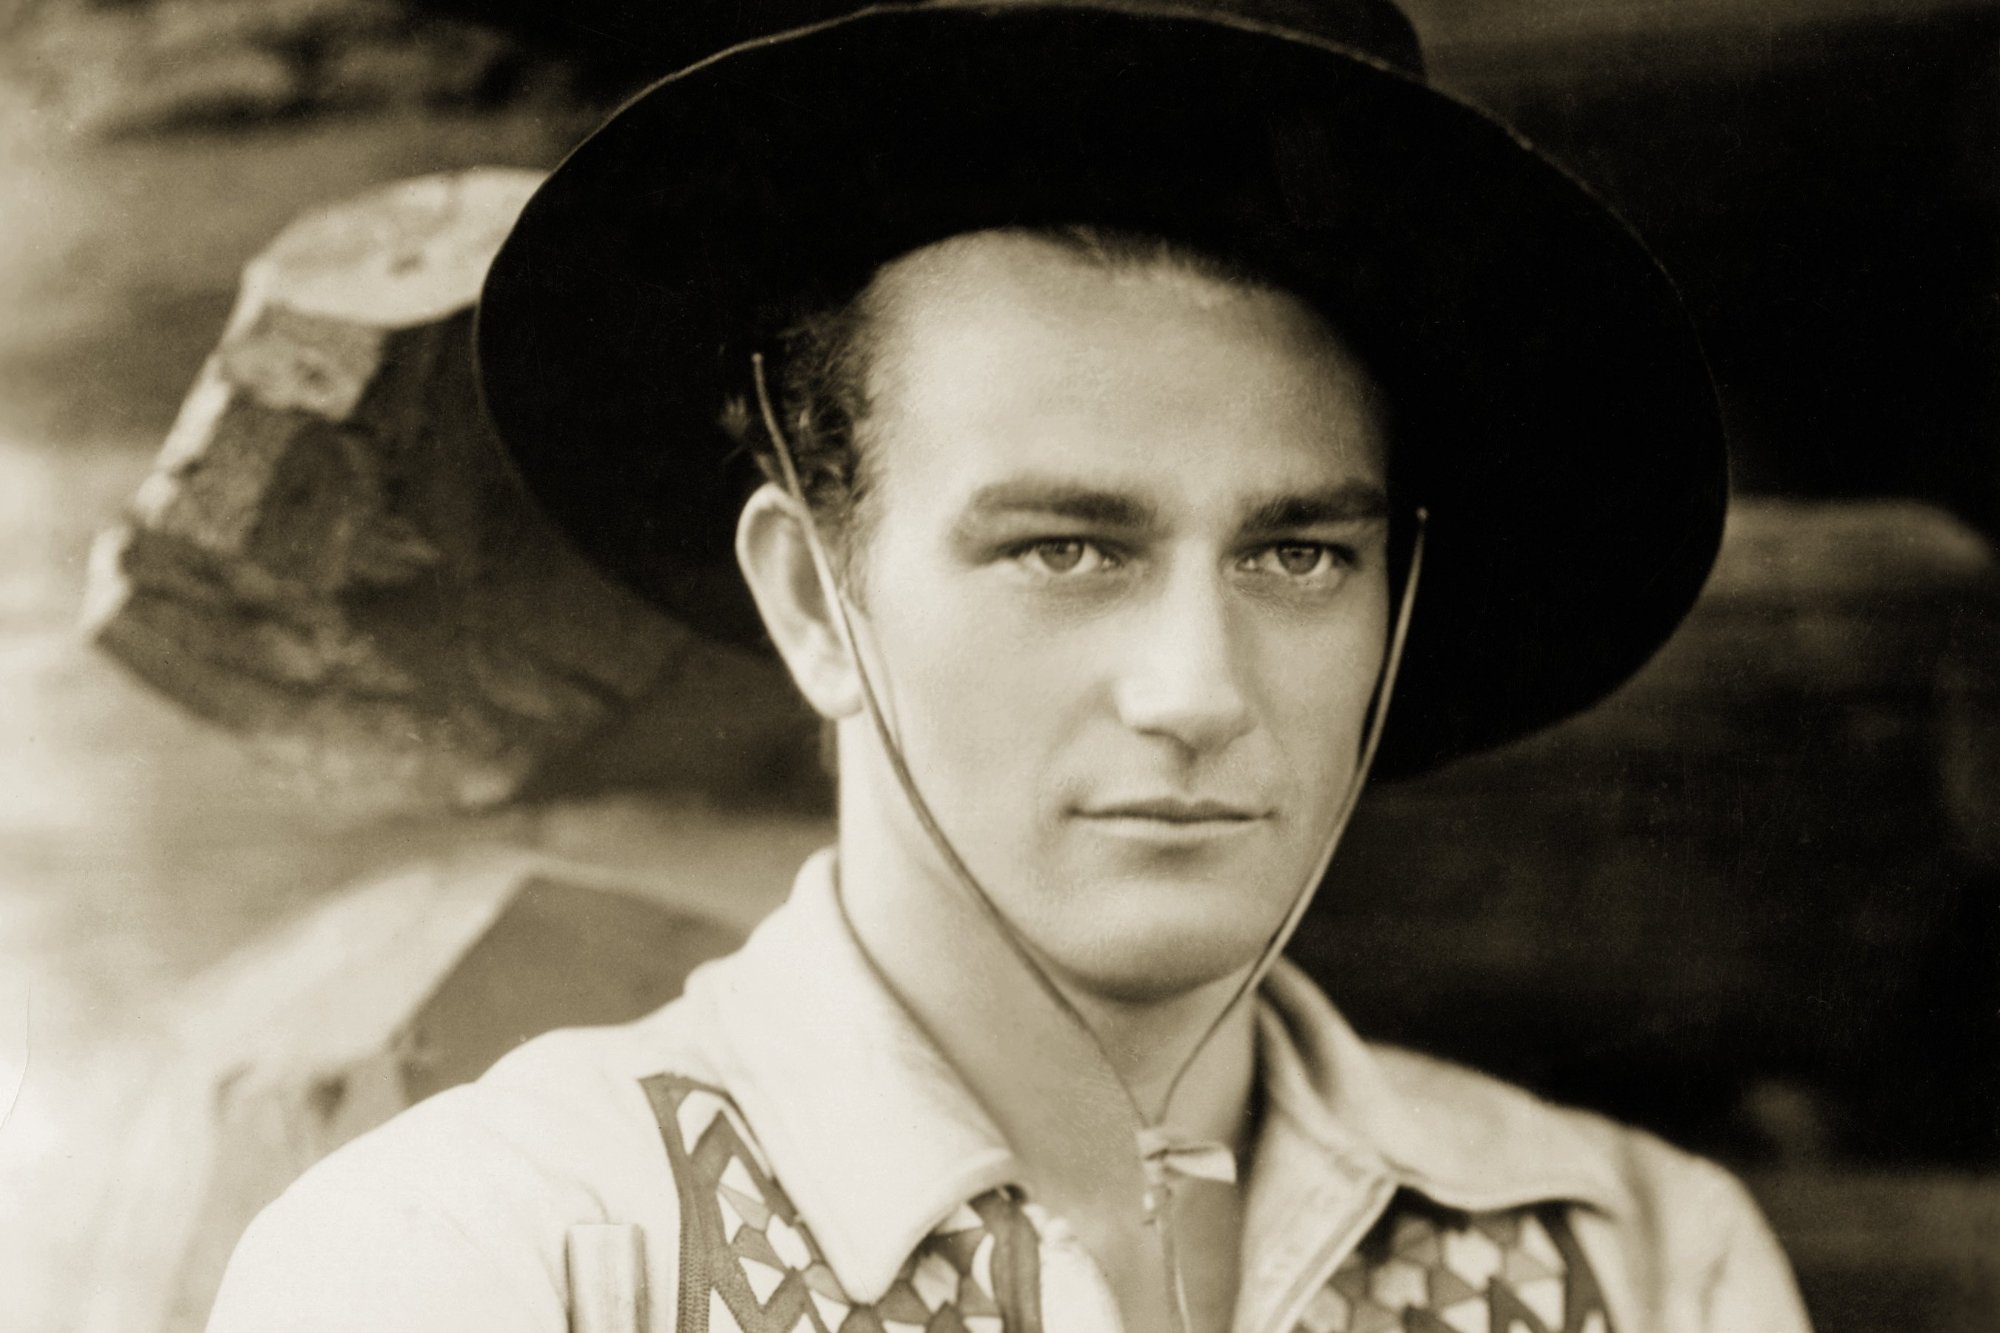 'The Big Trail' actor John Wayne wearing a cowboy hat and Western costume. The photo is in sepia tone.